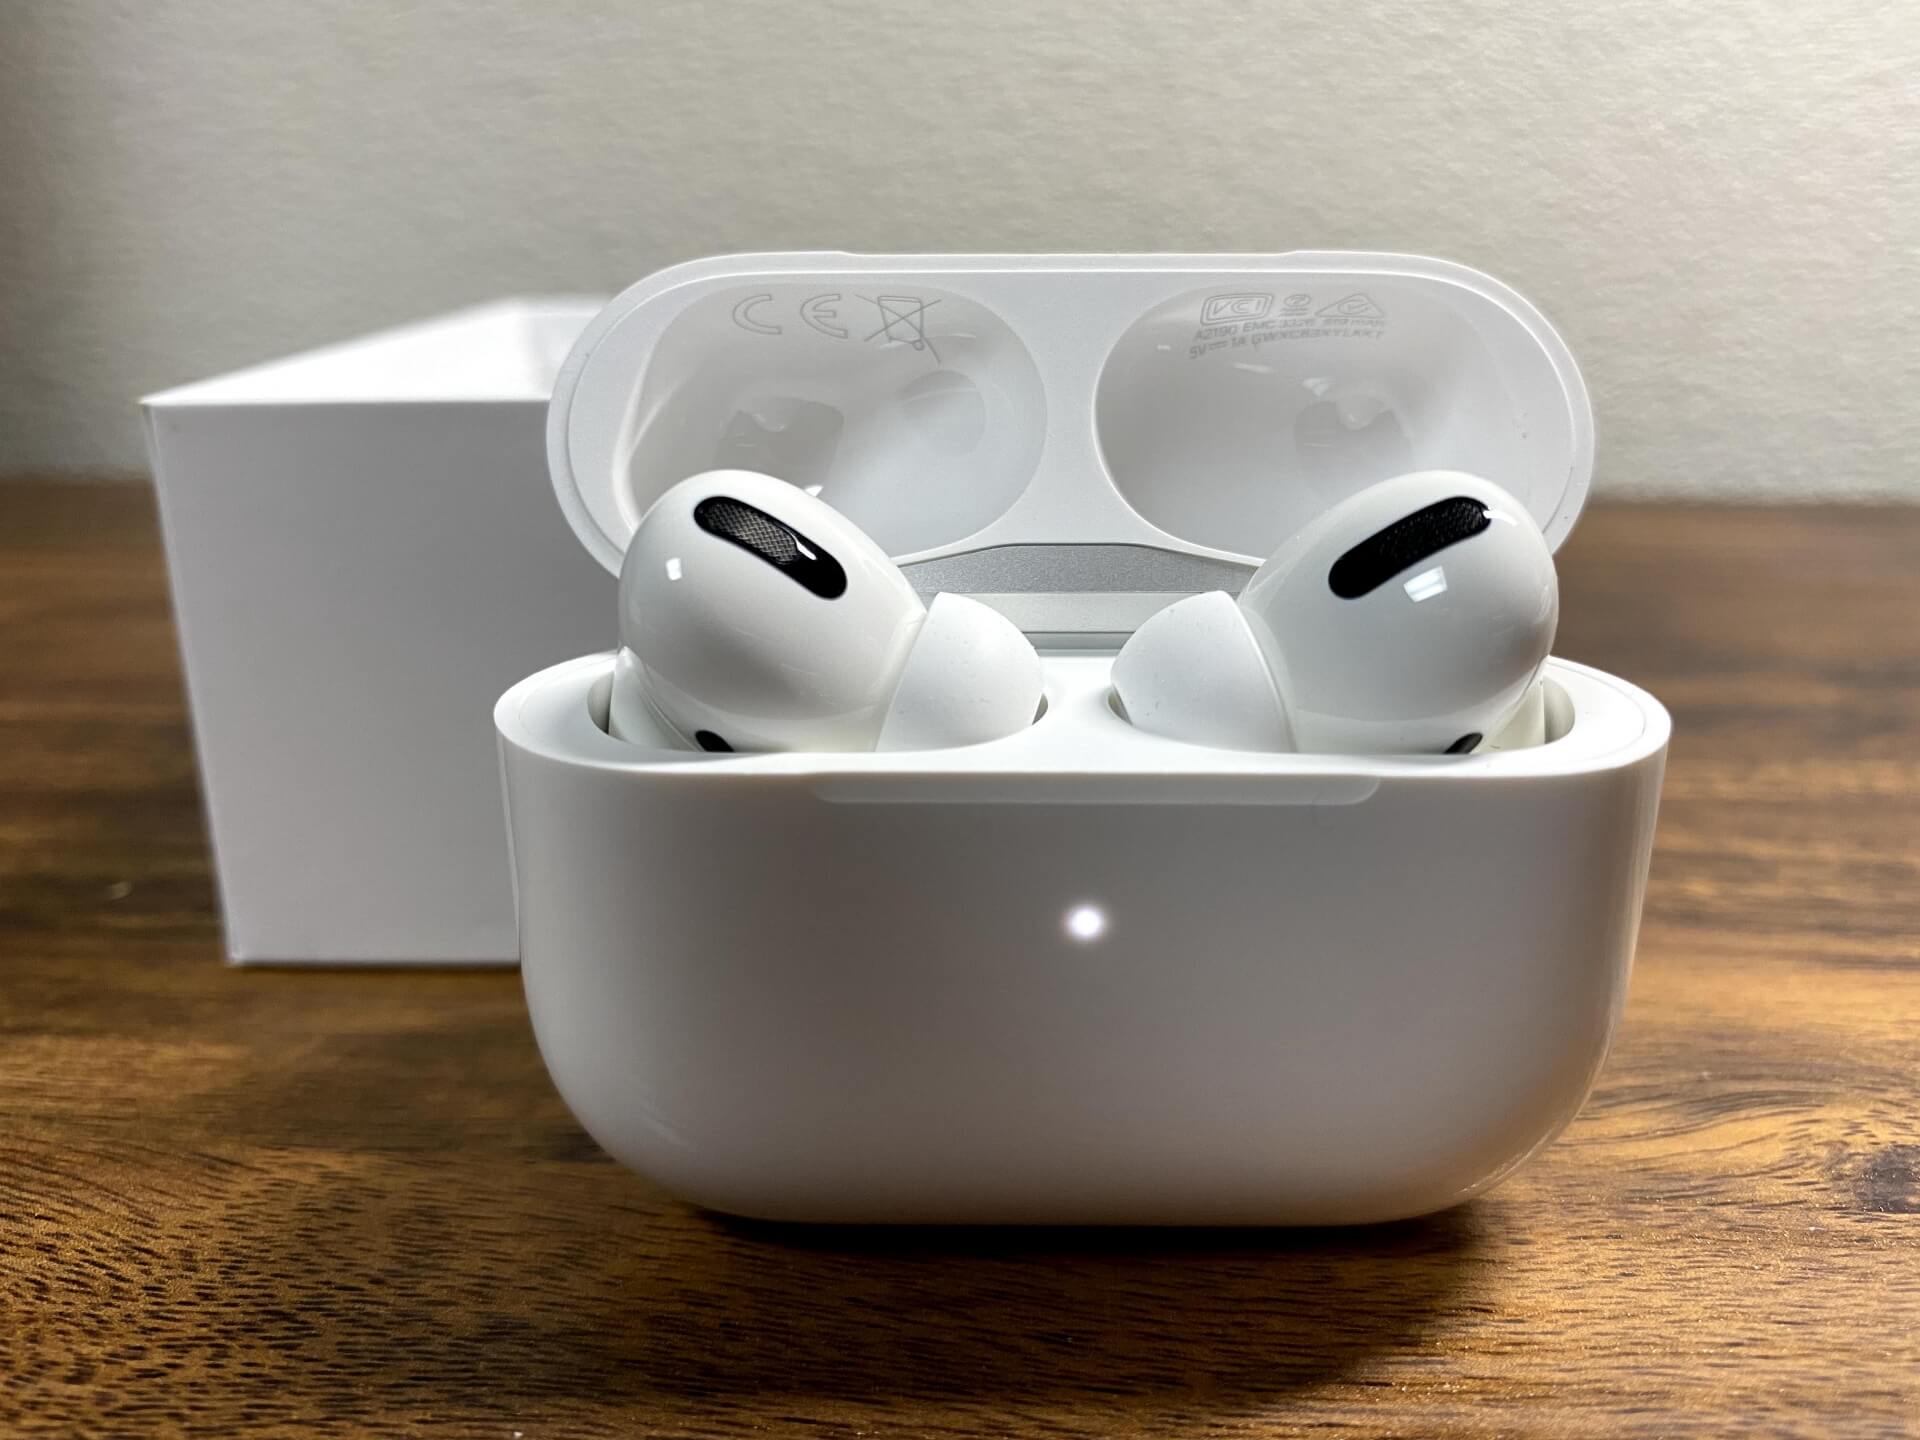 AirPods 高価買取】AirPods Max、AirPods Pro、AirPodsを高く売るコツ